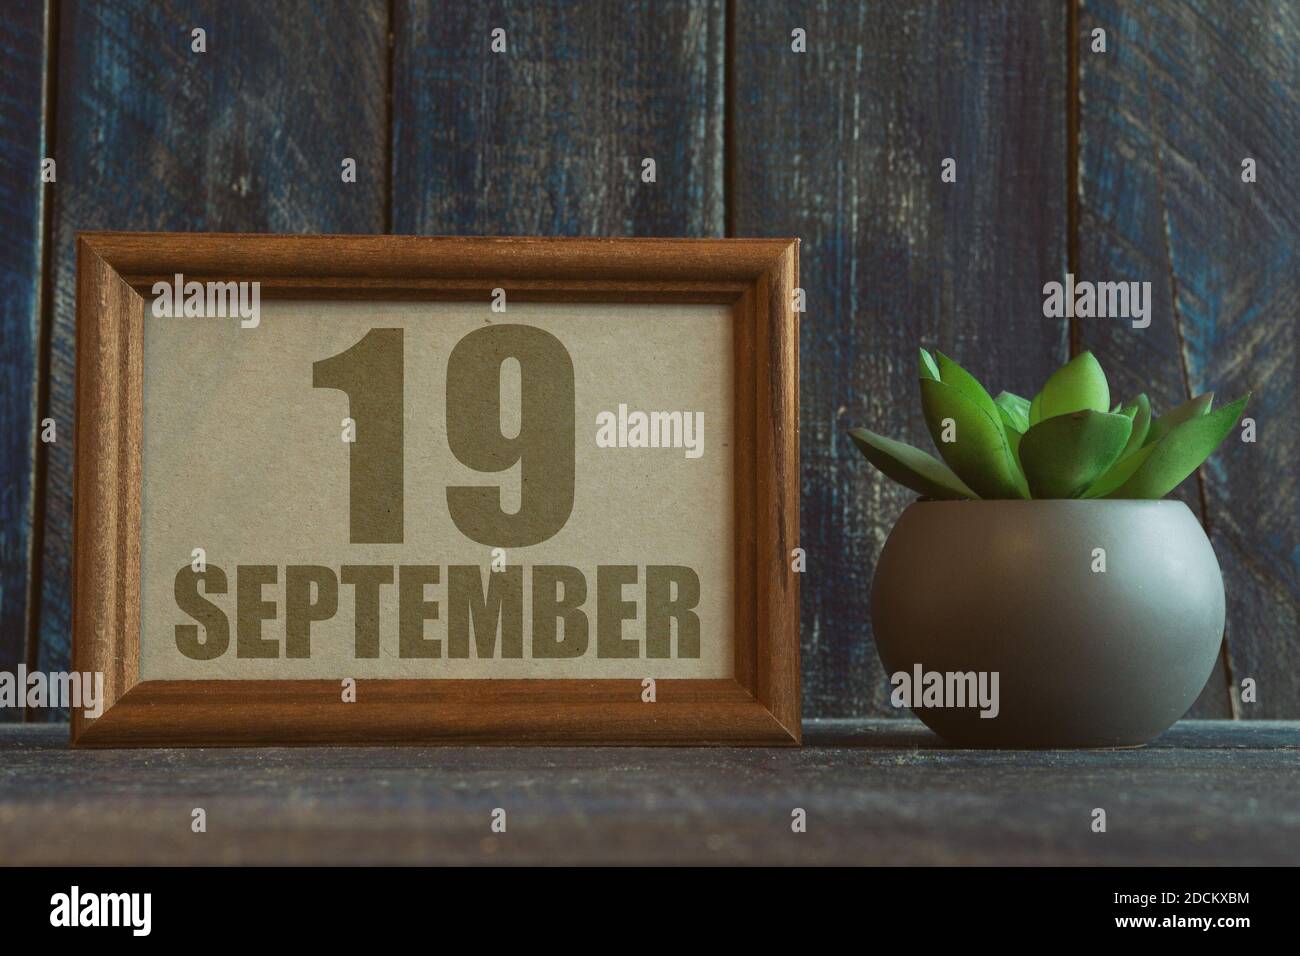 september 19th. Day 19 of month, date in frame next to succulent on wooden background autumn month, day of the year concept Stock Photo